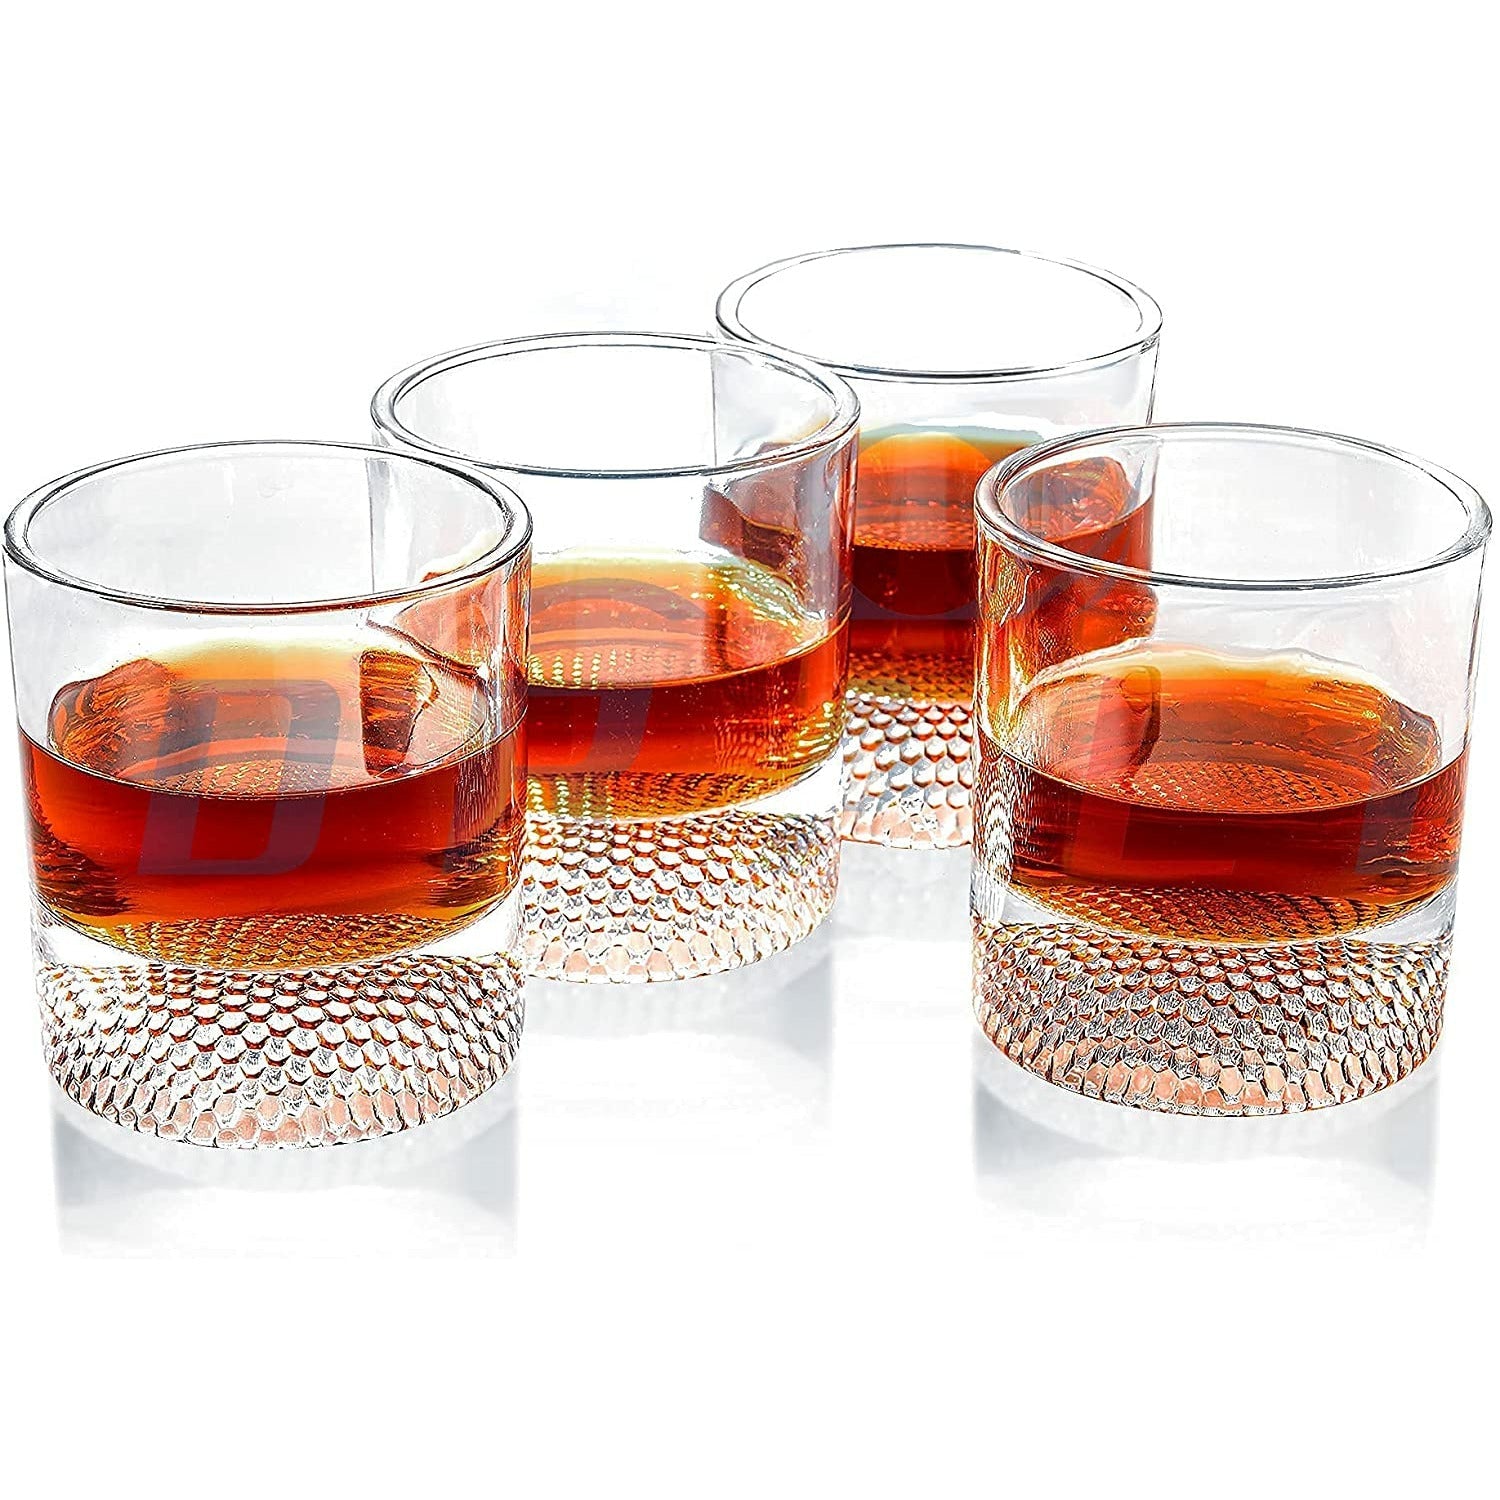 Golf Ball Whiskey Glasses Set of 4 - Groovy Guy Gifts